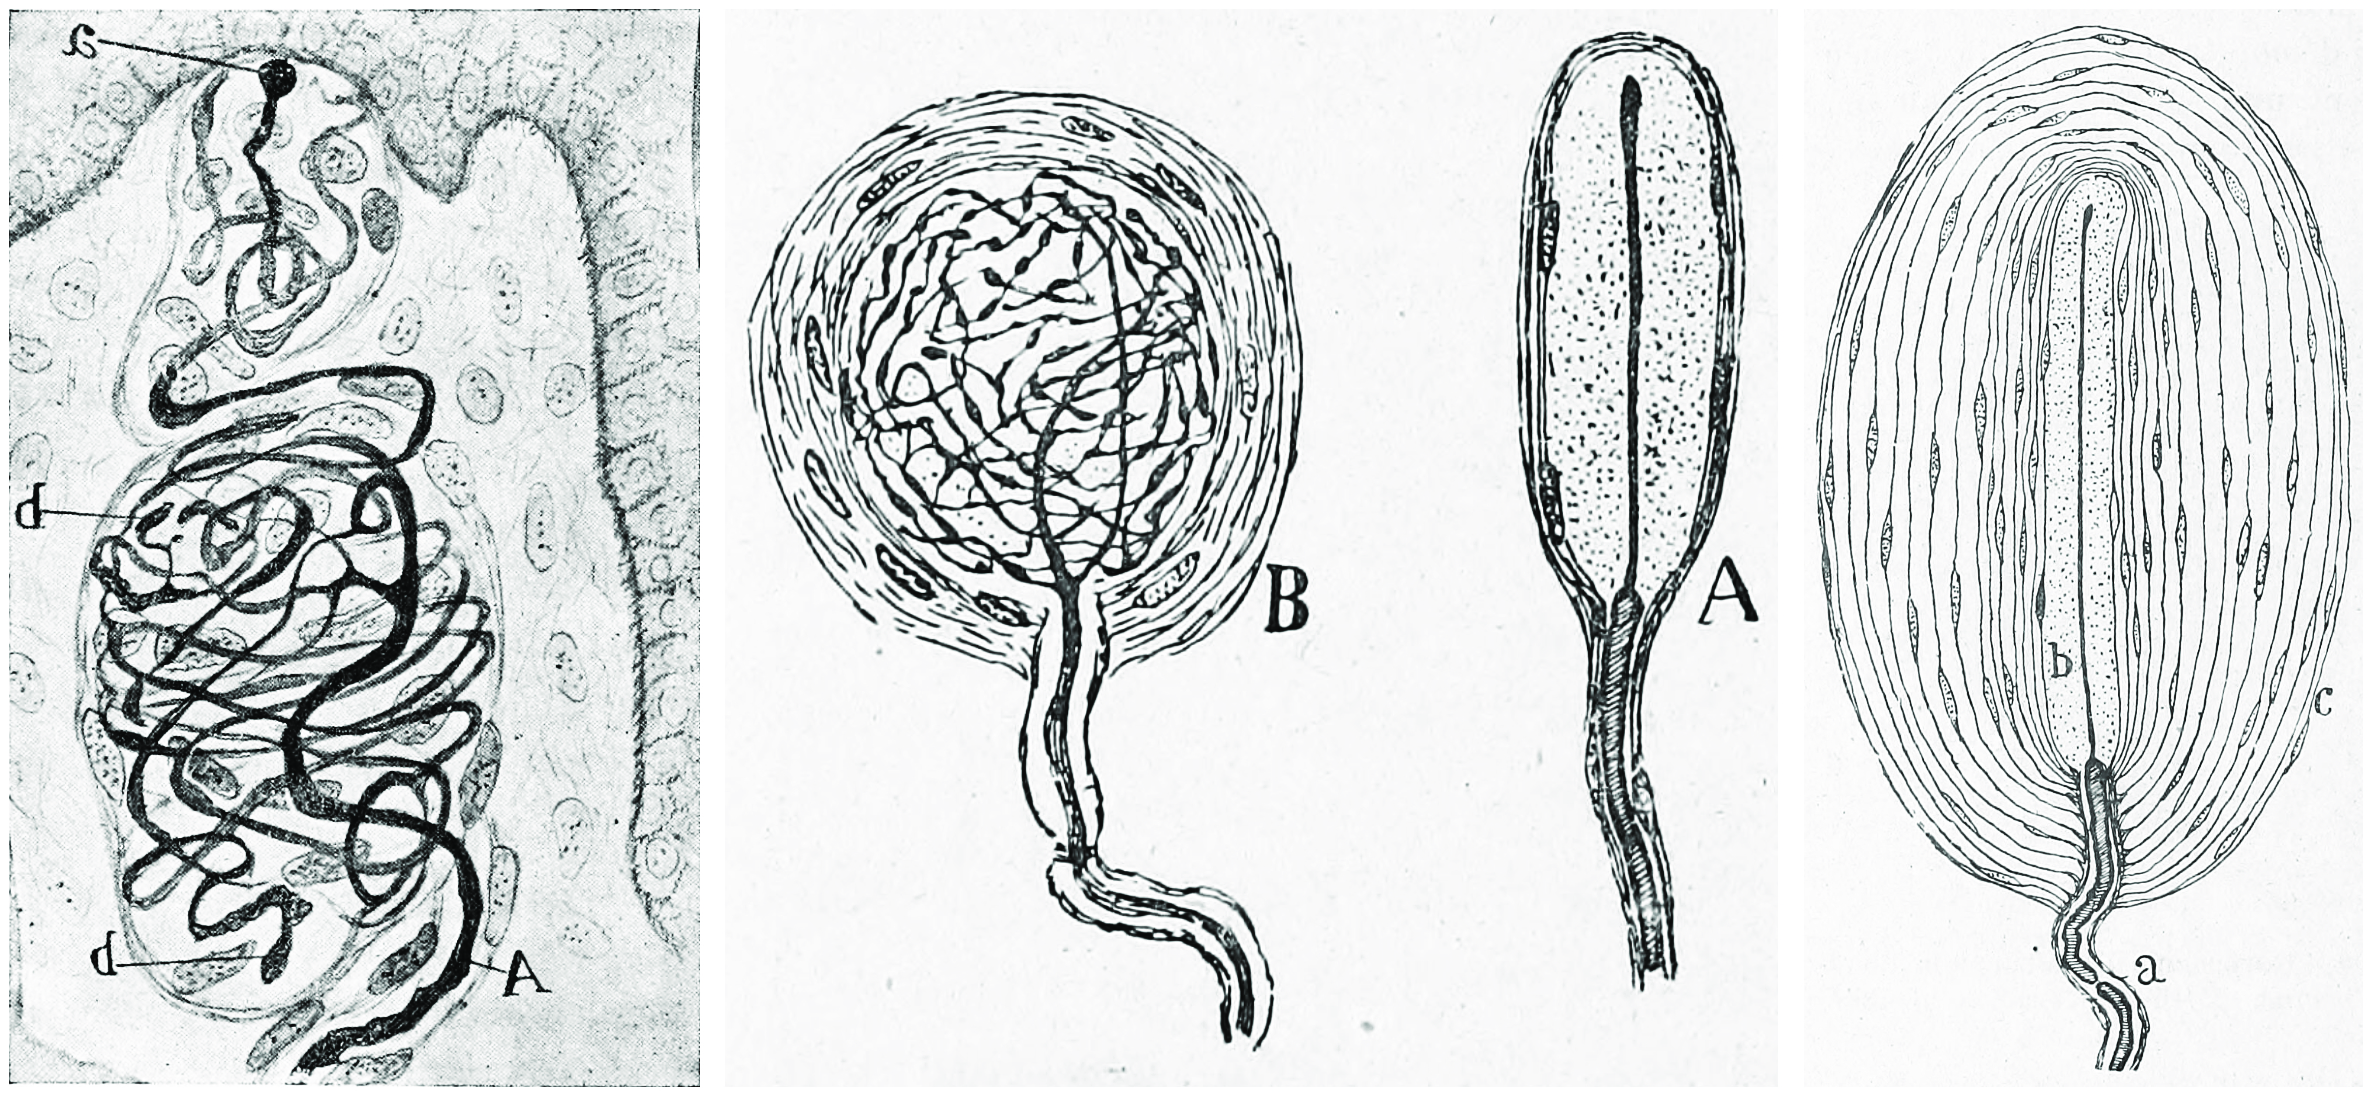 Tactile corpuscles (from left to right): Meissner, Krause, Pacini